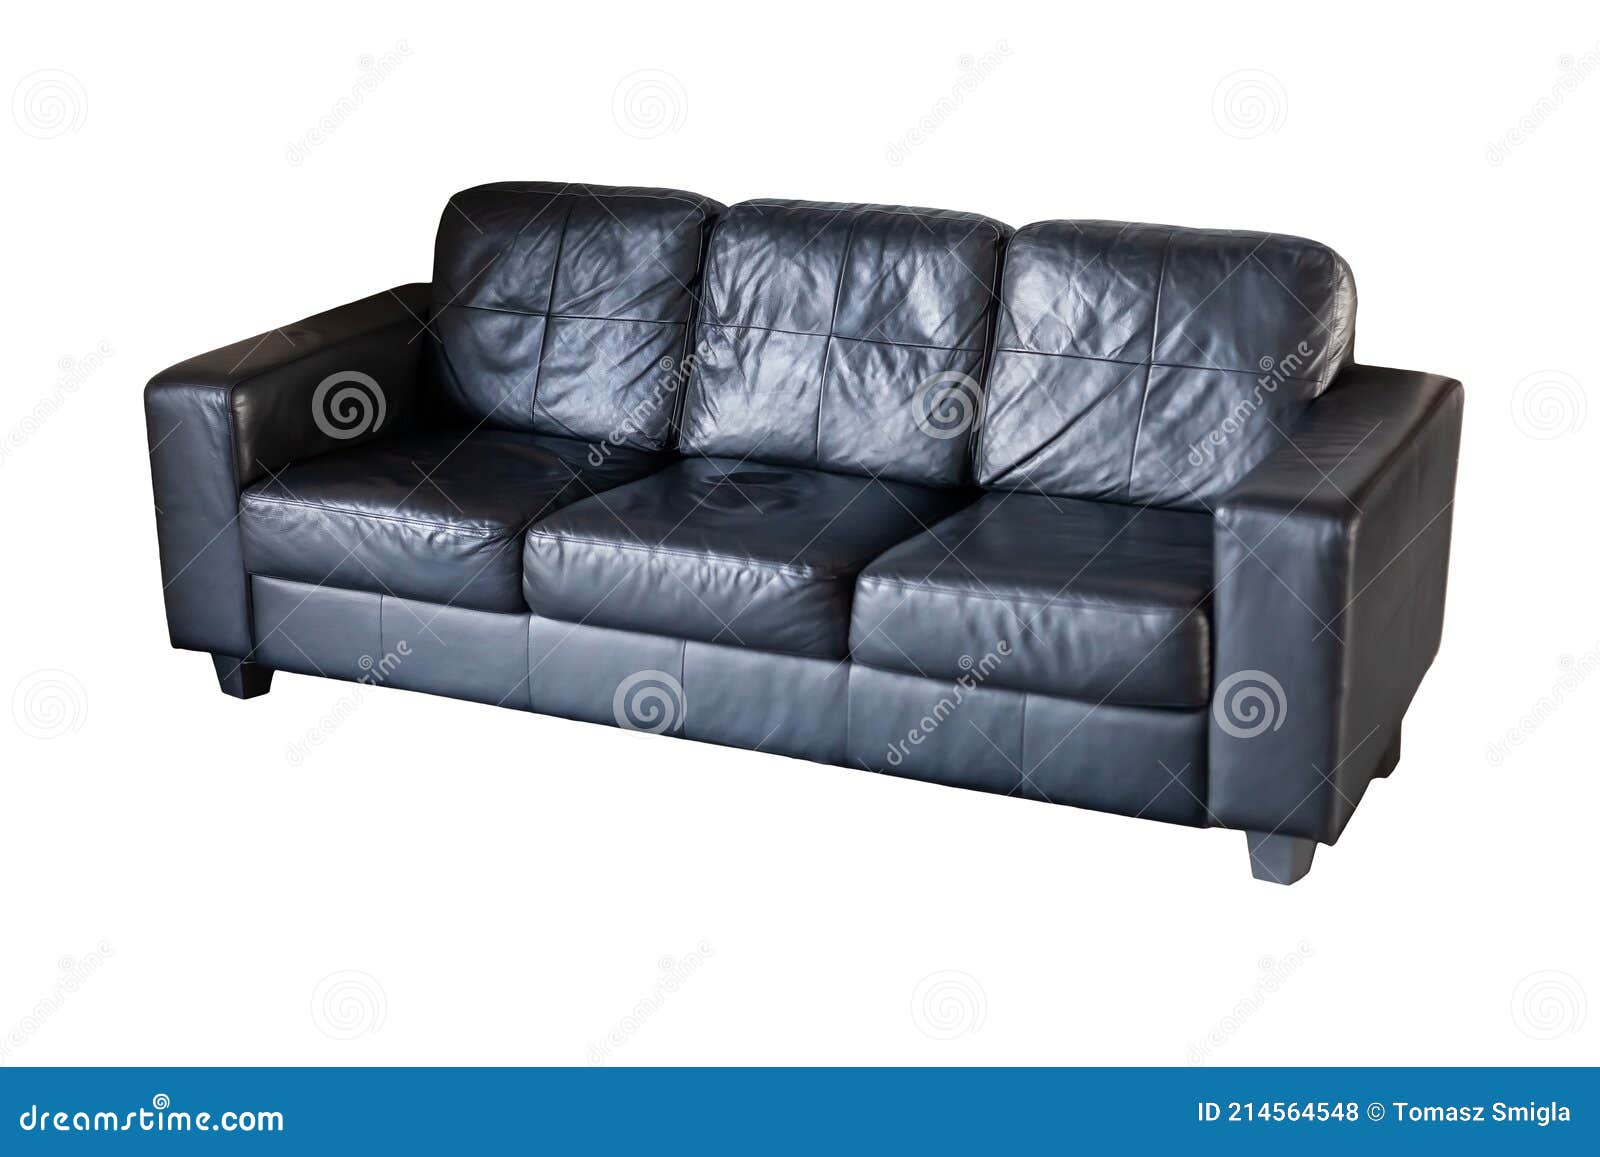 Casting couch room